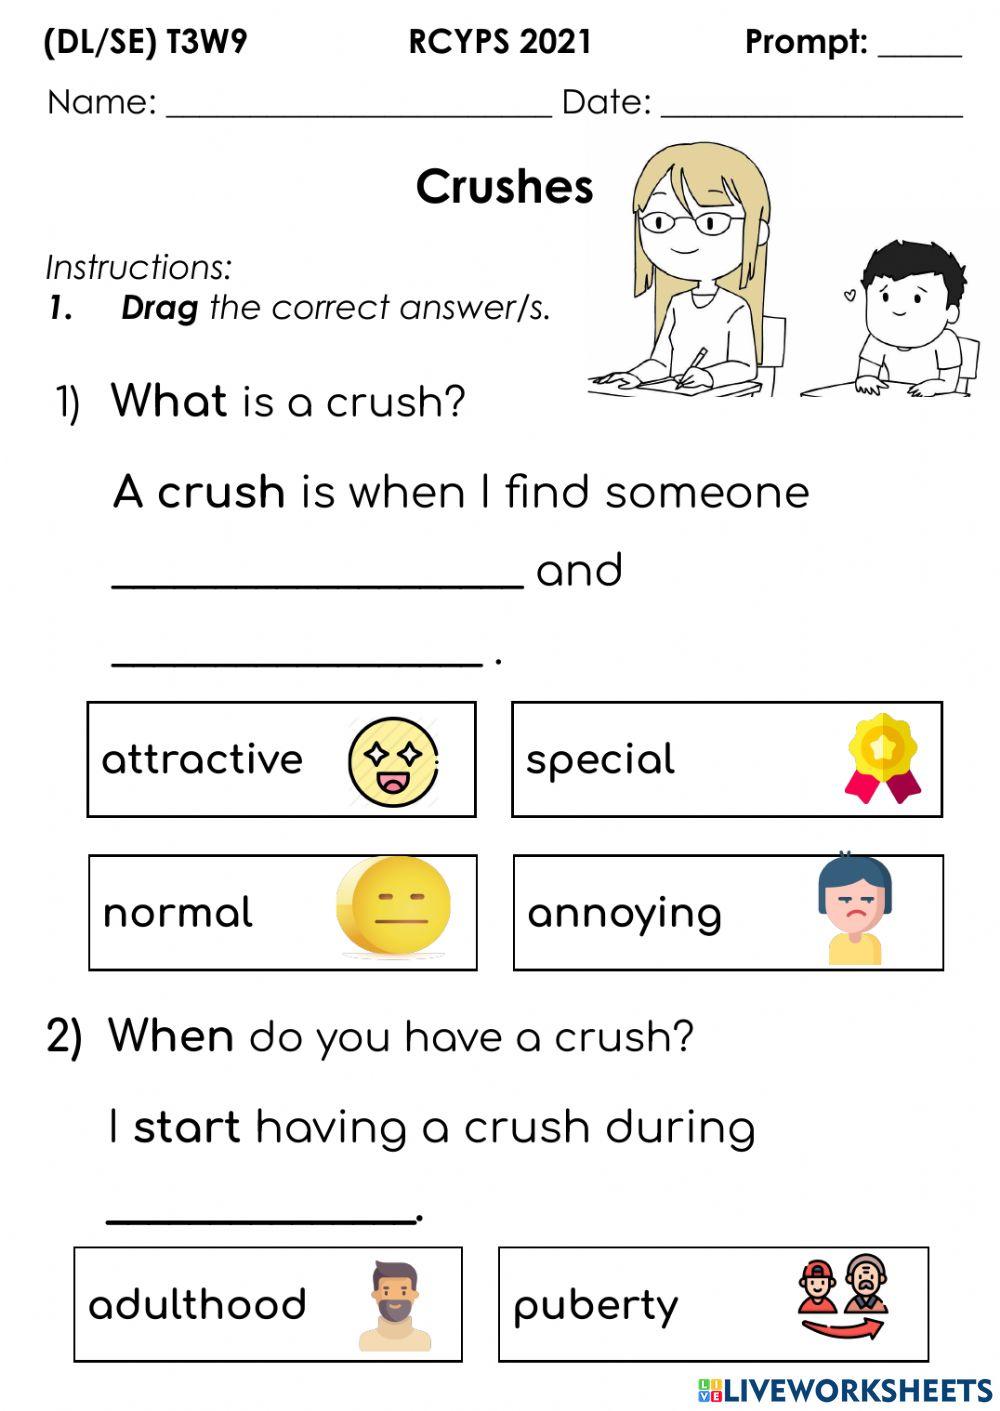 Crushes and Personal Space